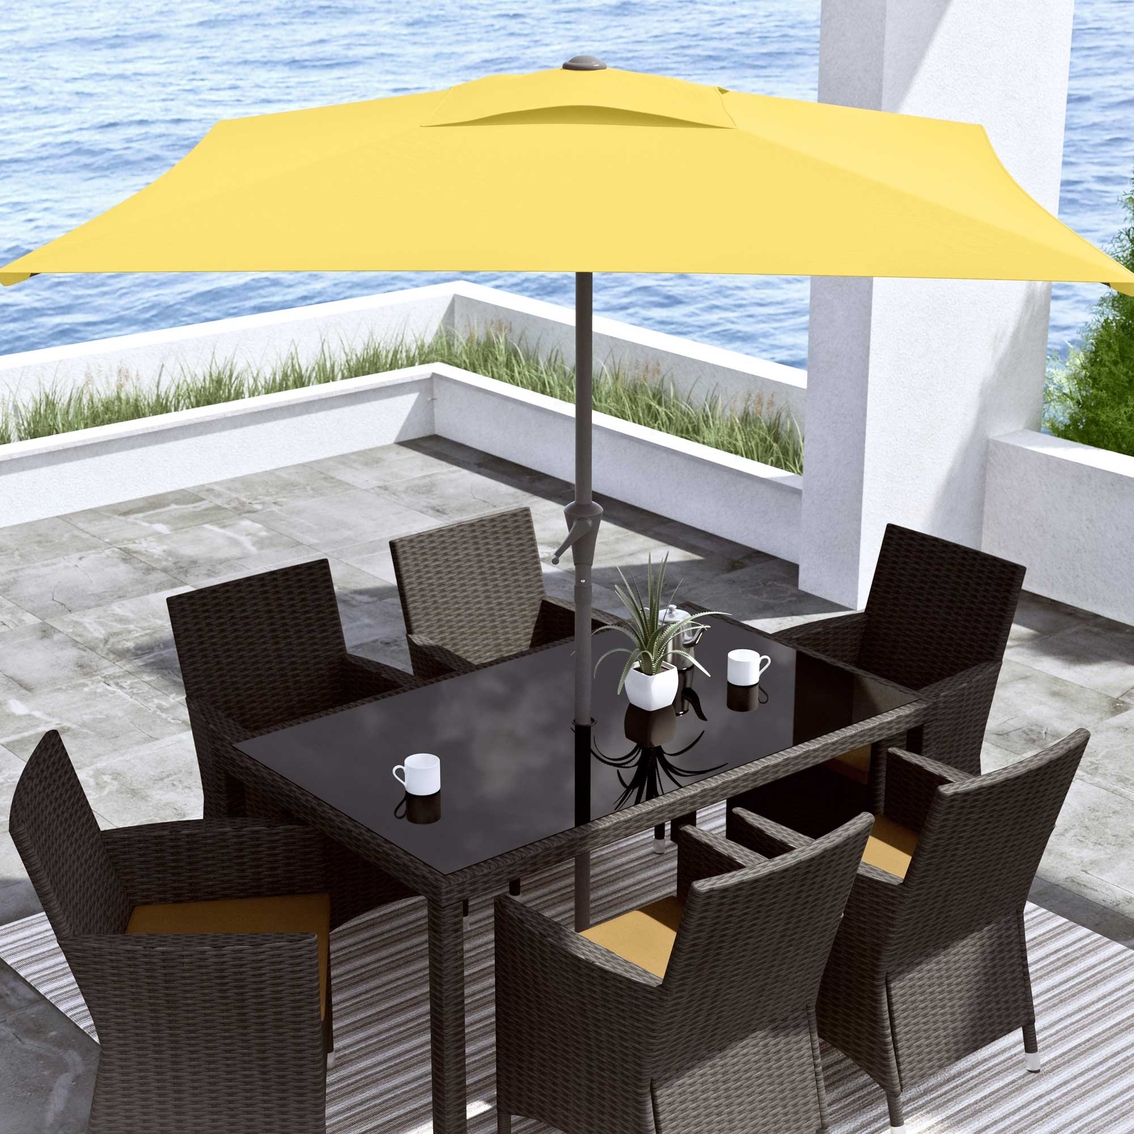 CorLiving 9 ft. Square Tilt Patio Umbrella with Base - Image 5 of 5